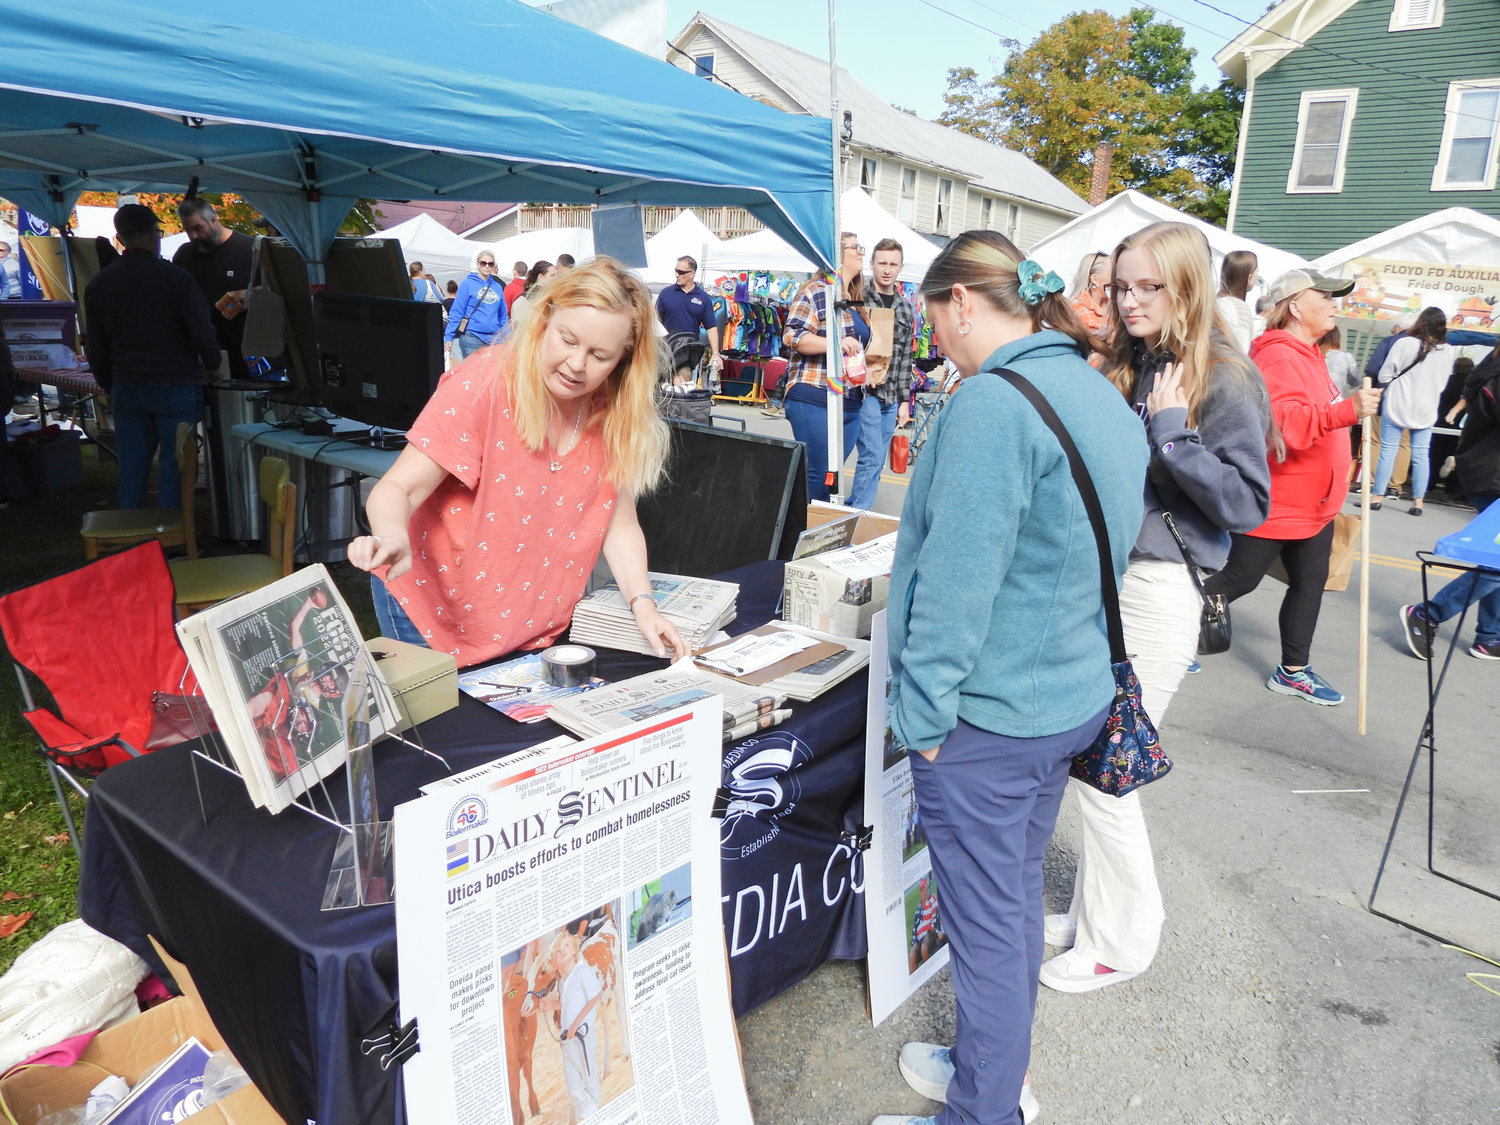 The Remsen Barn Festival of the Arts saw Main Street packed with people looking to sample good foods and take home unique arts and crafts on Saturday, Sept. 24 in the town of Remsen. The Festival made a return after a leave of absence due to COVID-19. Pictured is the Daily Sentinel's Business Manager Eileen Pierson, speaking with Festival attendees about the Sentinel Media Company's publications and what it has to offer.